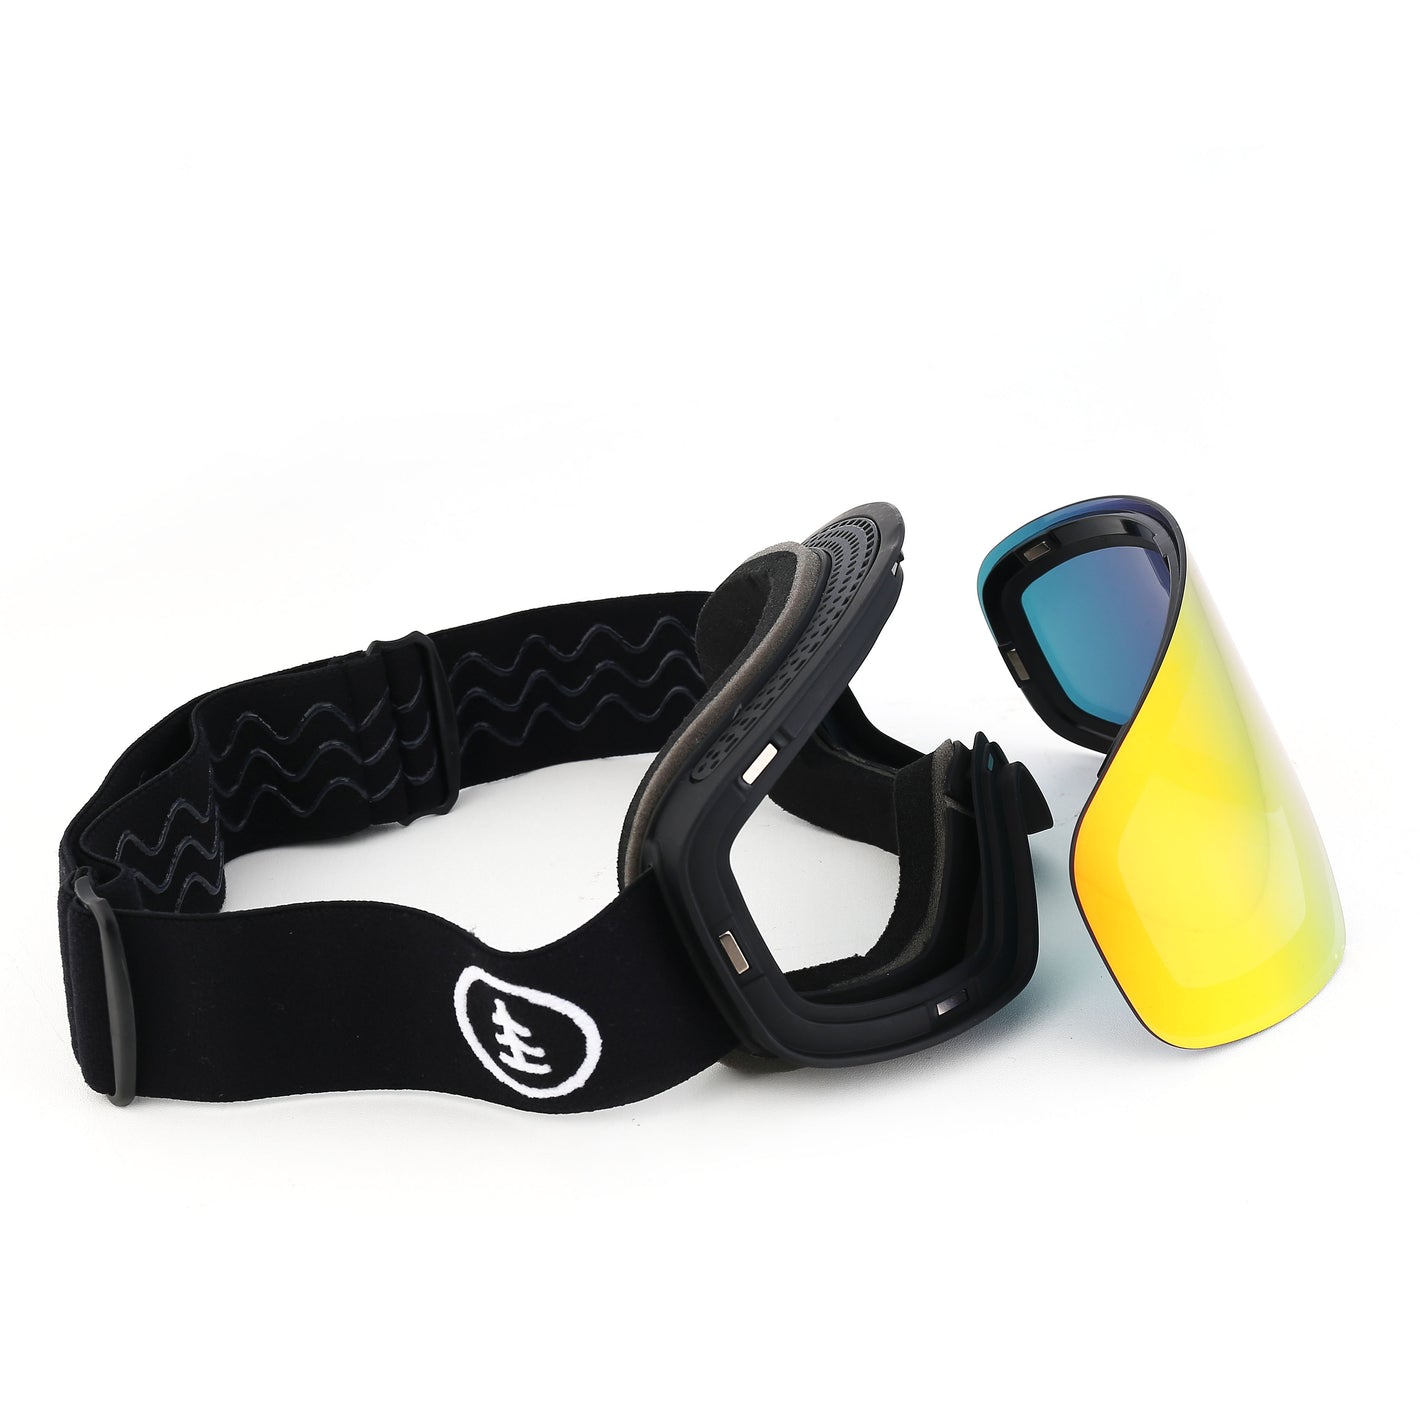 6fiftyfive Ski Goggles and Snow Goggles, Magnetic, full frame, multi layer, interchangeable lens. full REVO